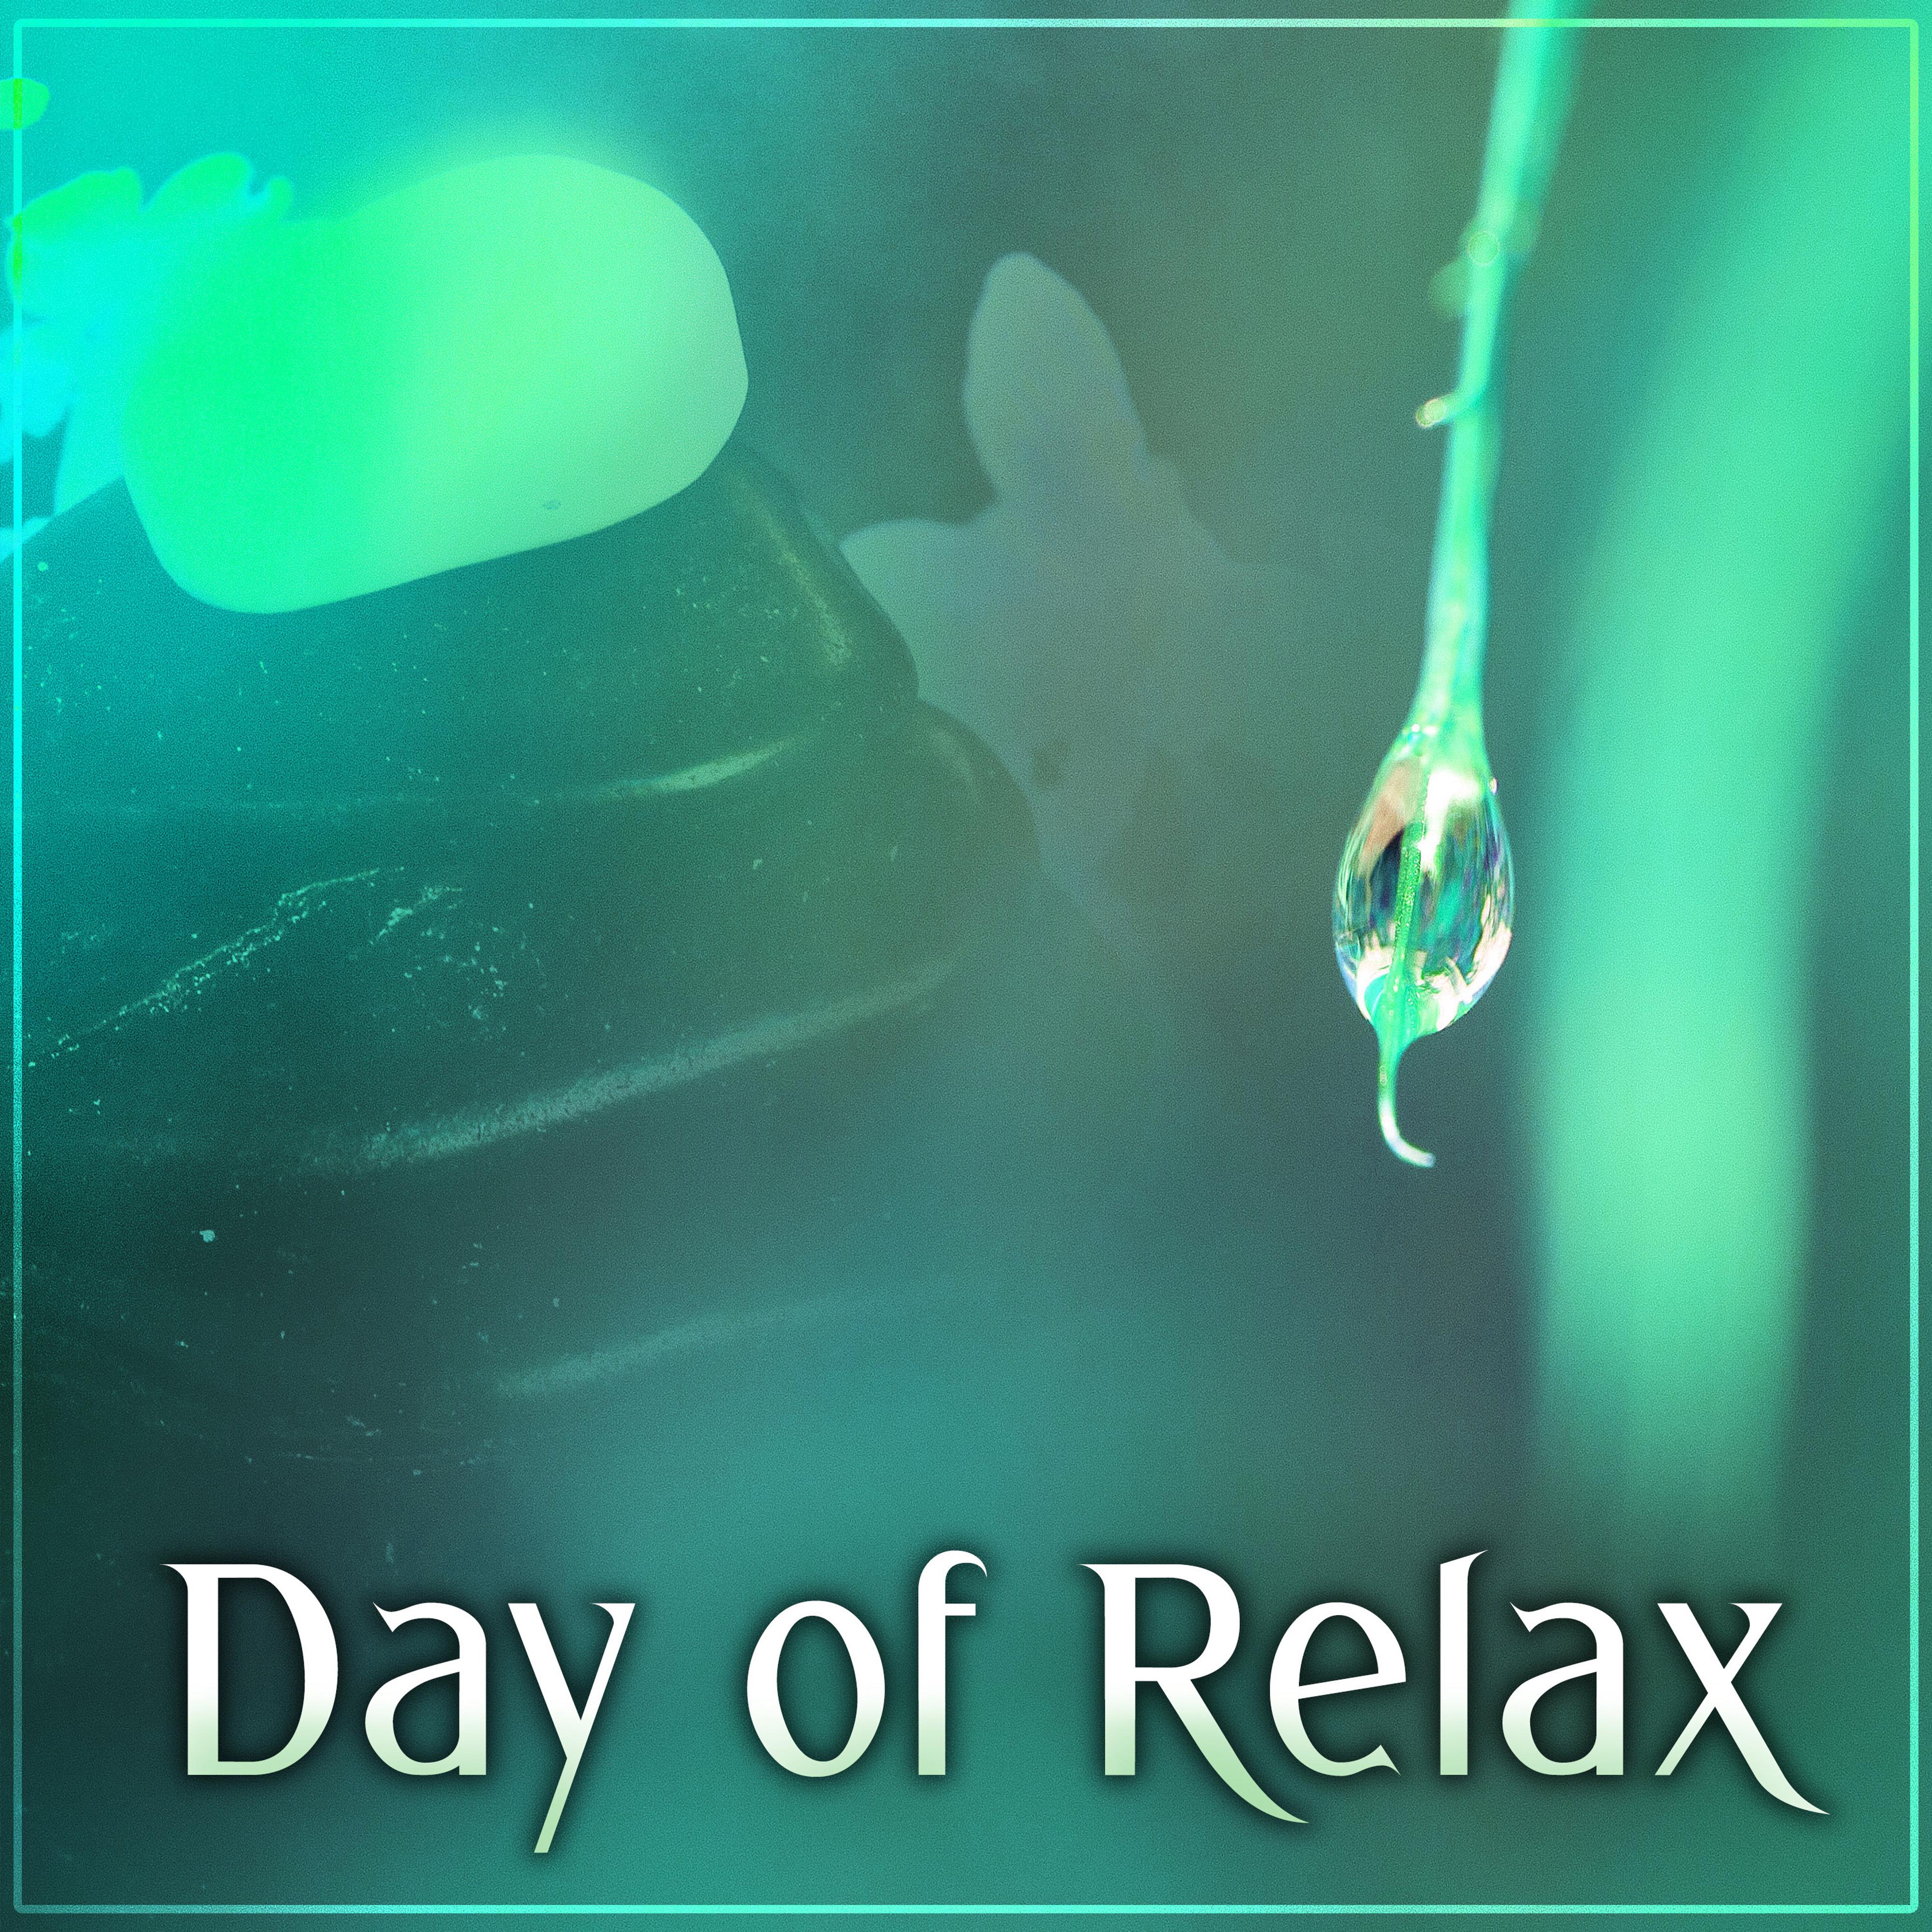 Day of Relax  Peaceful Music for Pure Relax, Spa, Wellness, Healing Smooth Sounds for Therapy, Massage, Hotel Spa  Wellness